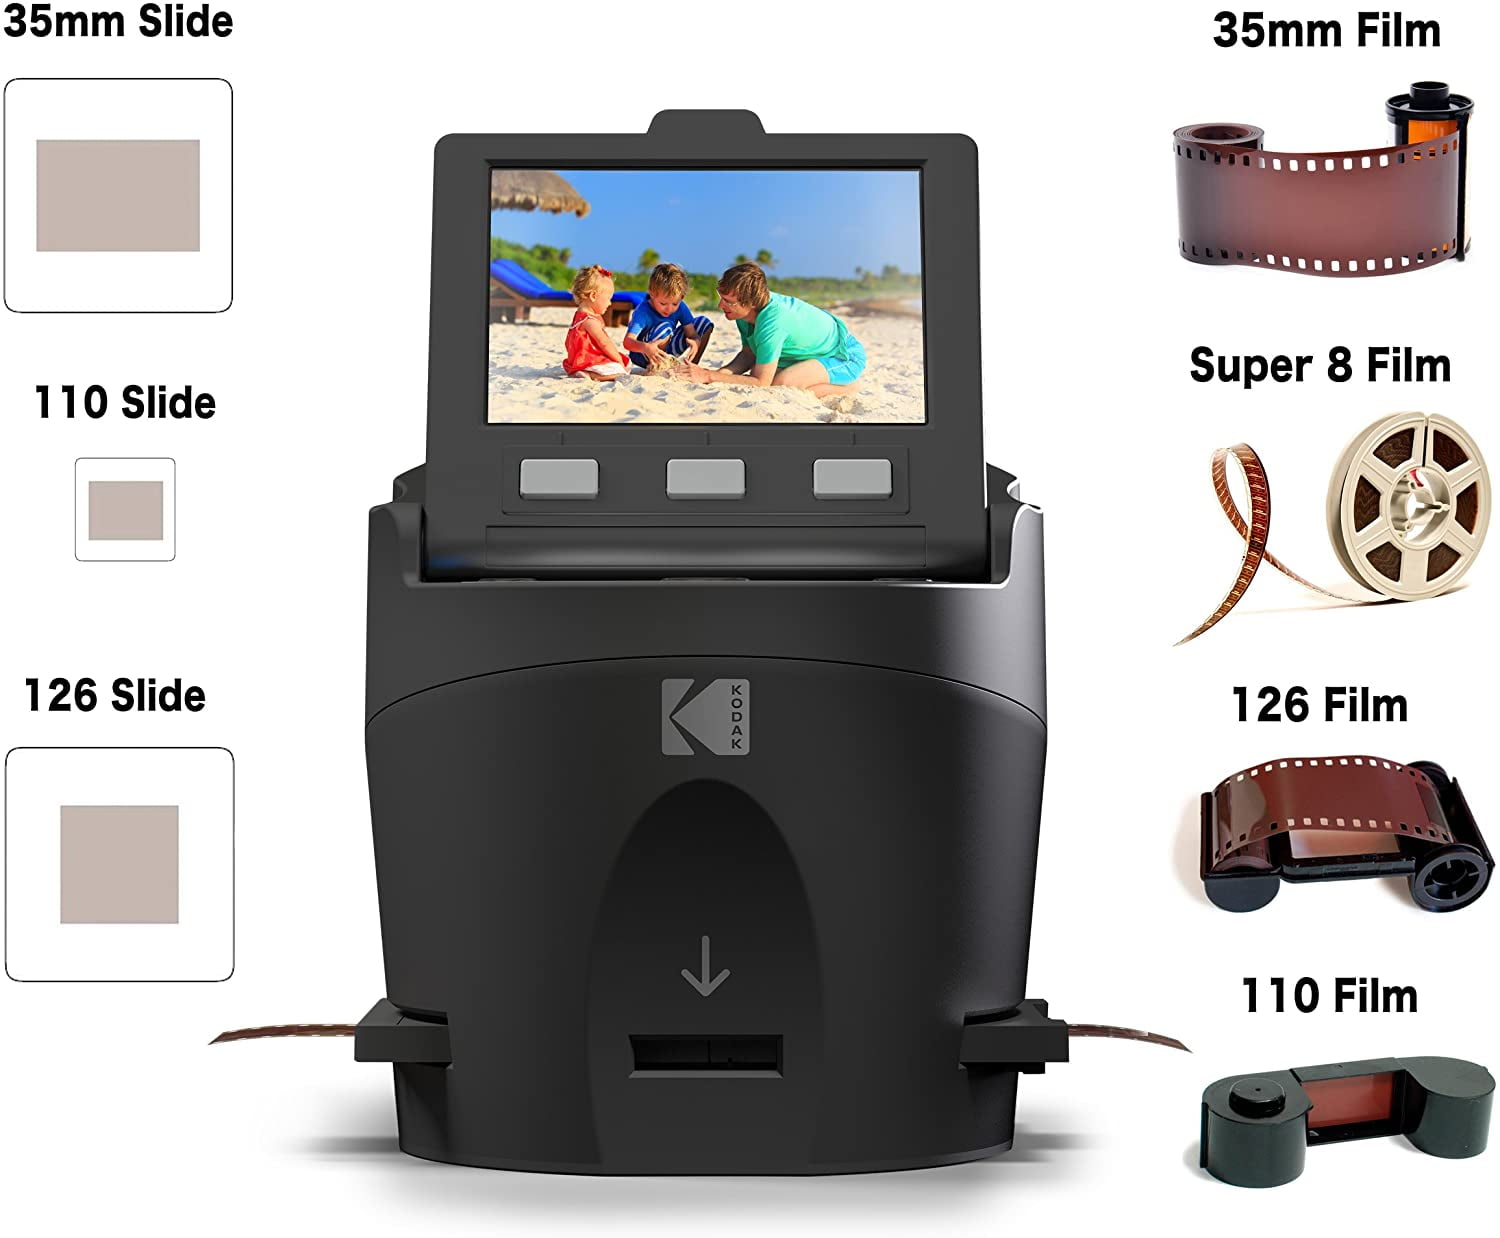 zonoz FS-Five Digital Film & Slide Scanner Converts 35mm Includes Large Bright 5-Inch LCD Super 8 & 8mm Film Negatives & Slides to JPEG 16GB SD Card Easy-Load Film Inserts Adapters 126 110 